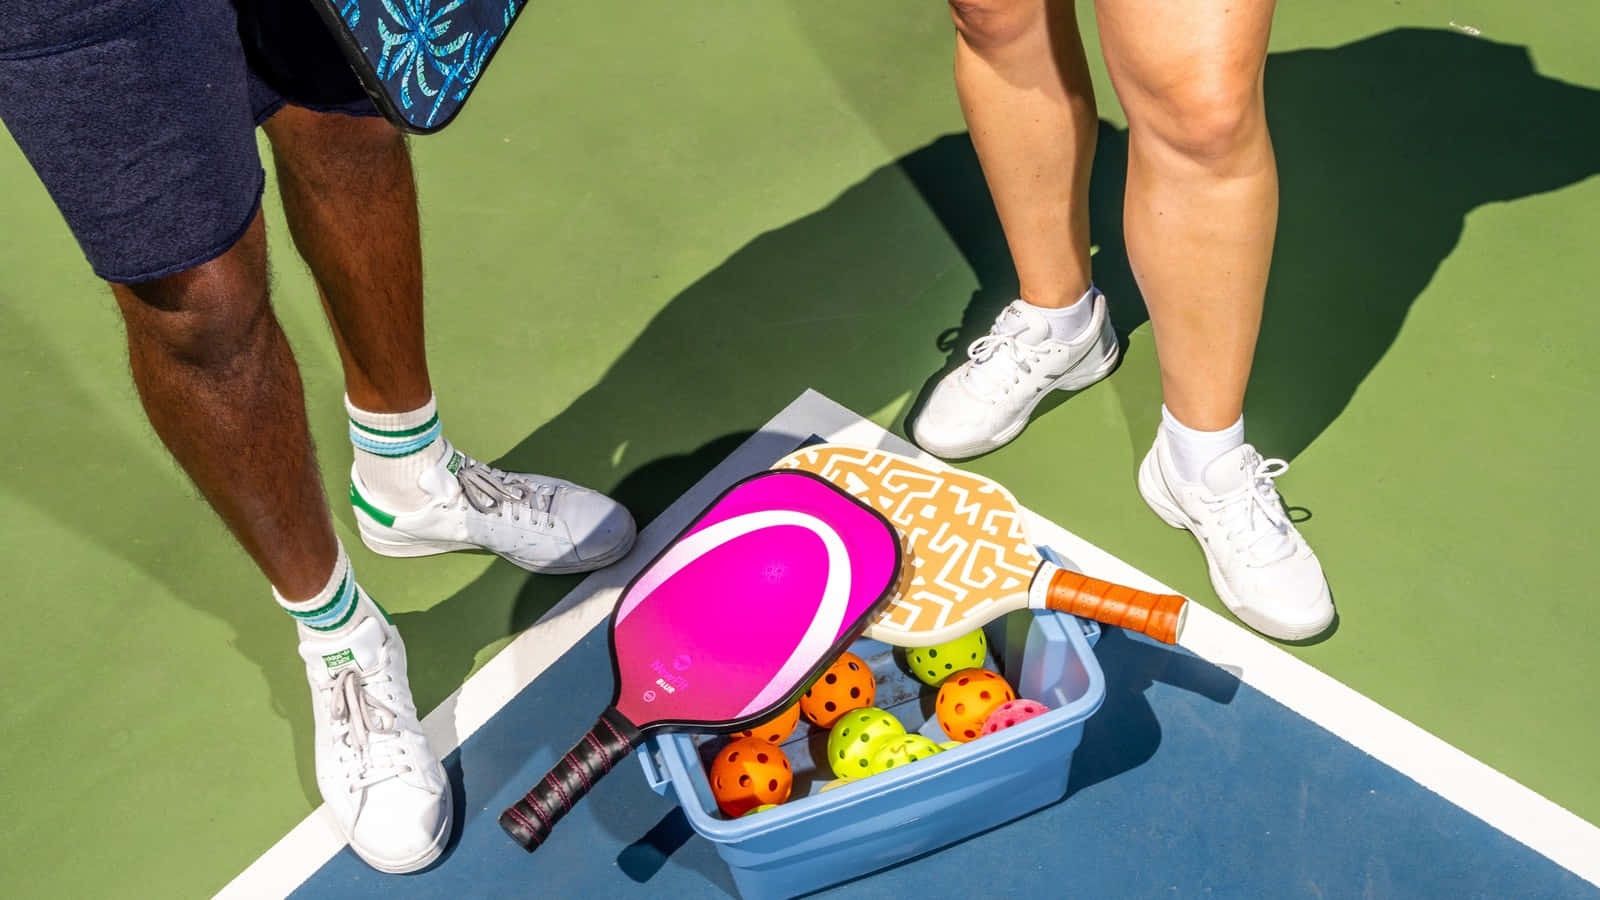 What is Pickleball And How do You Play It